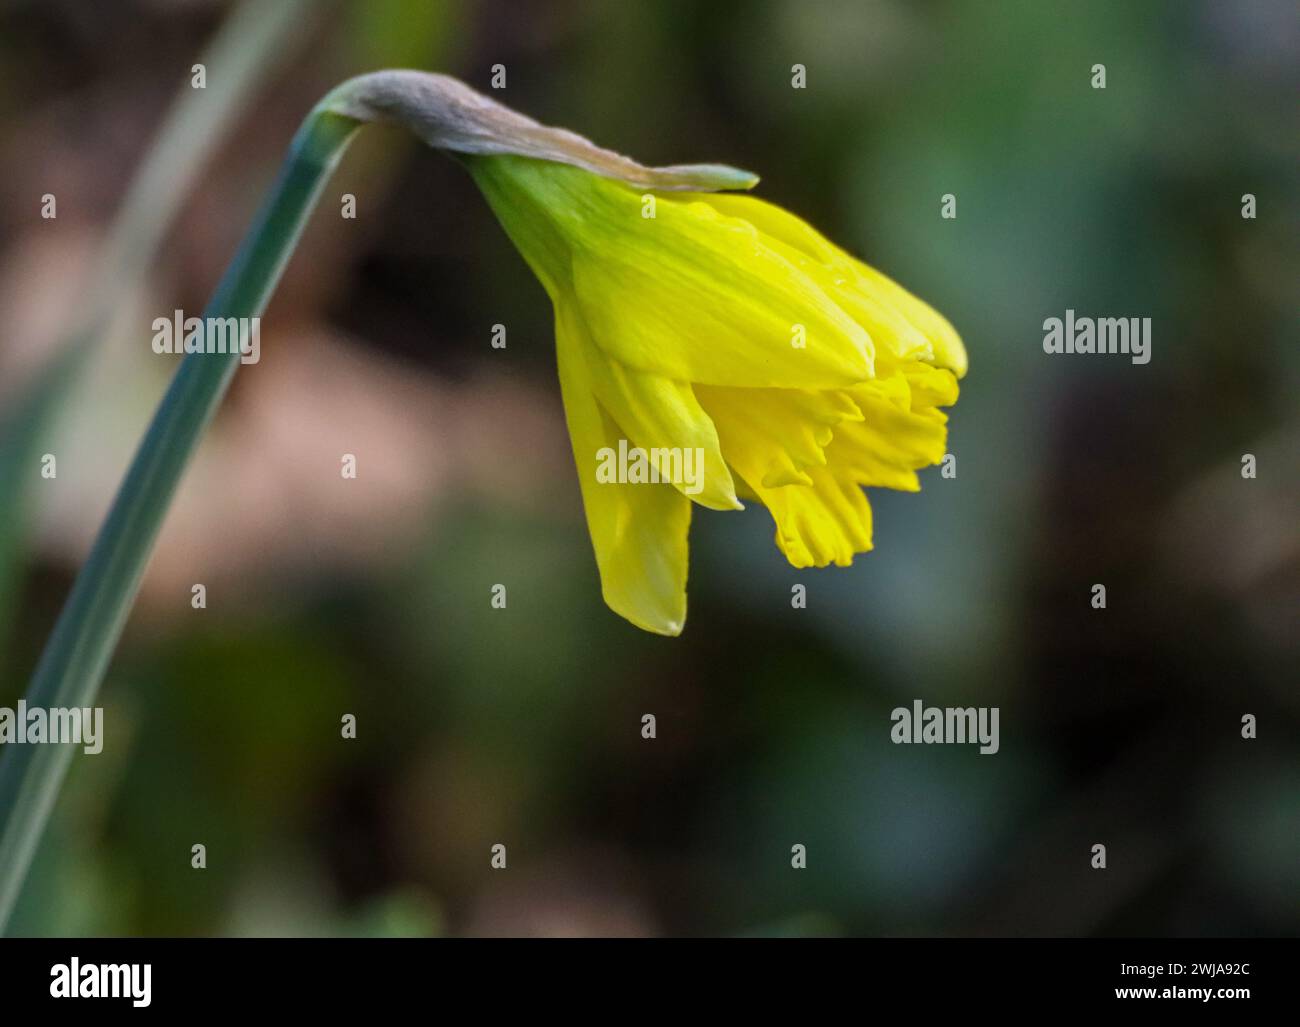 A close-up of vibrant yellow Daffodil blooming on grass stem Stock Photo